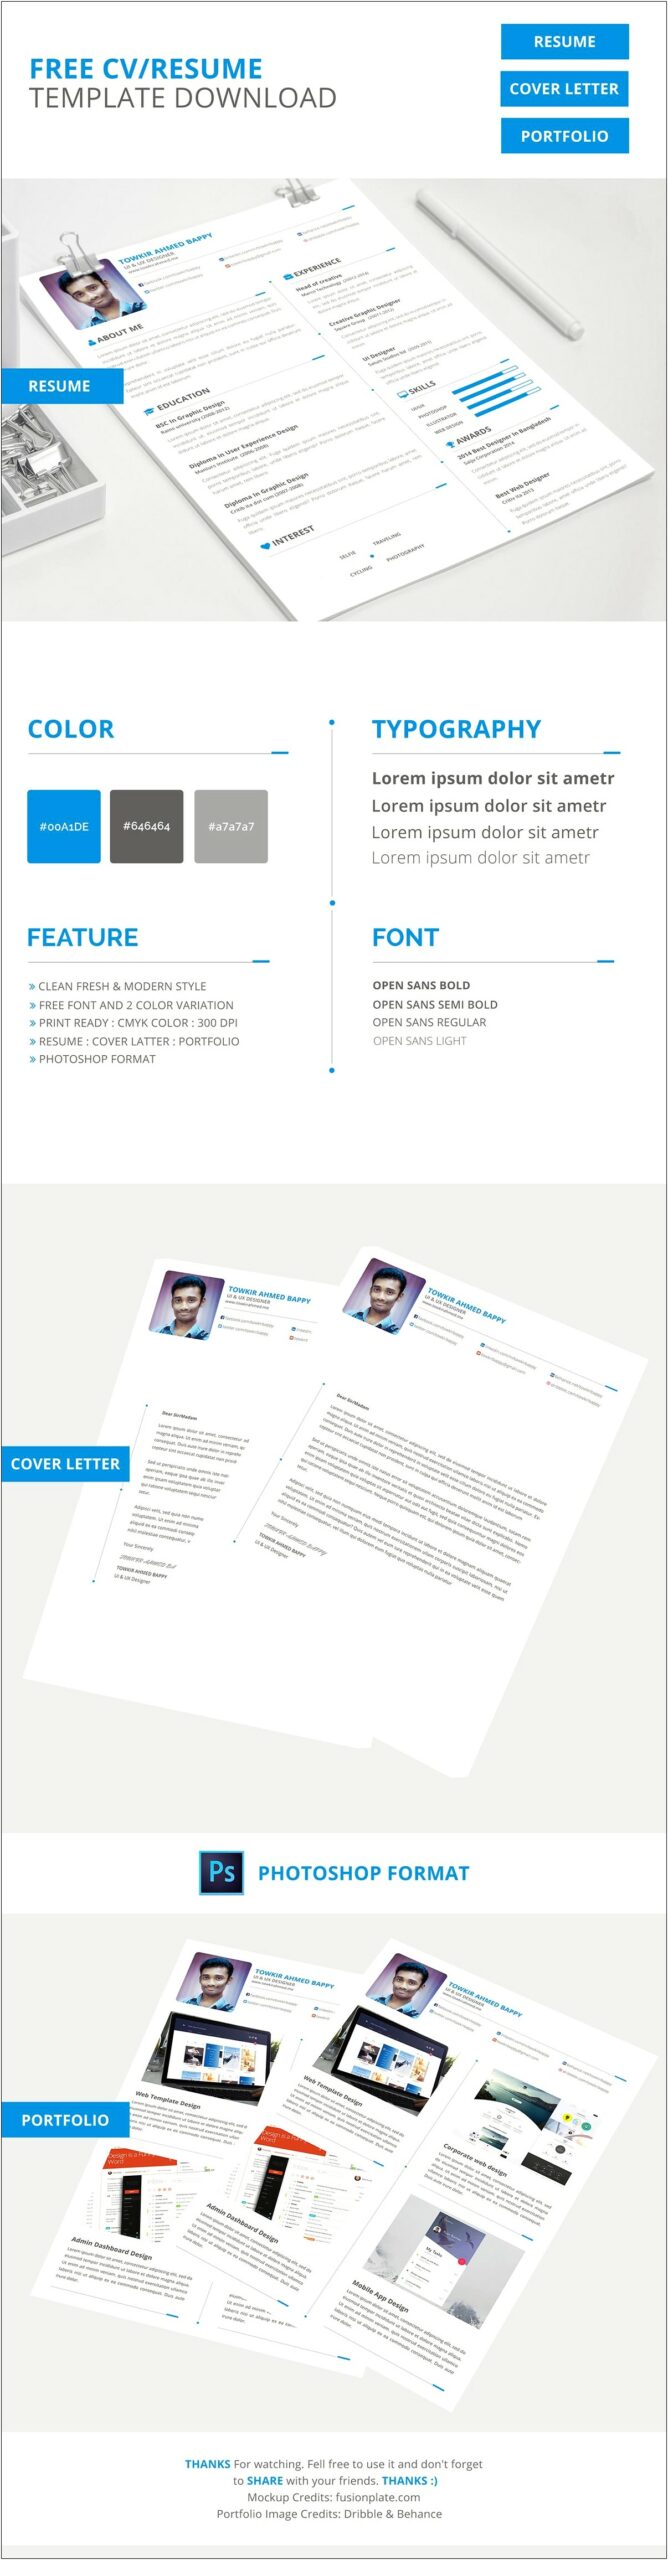 New Resume Format 2013 Free Download